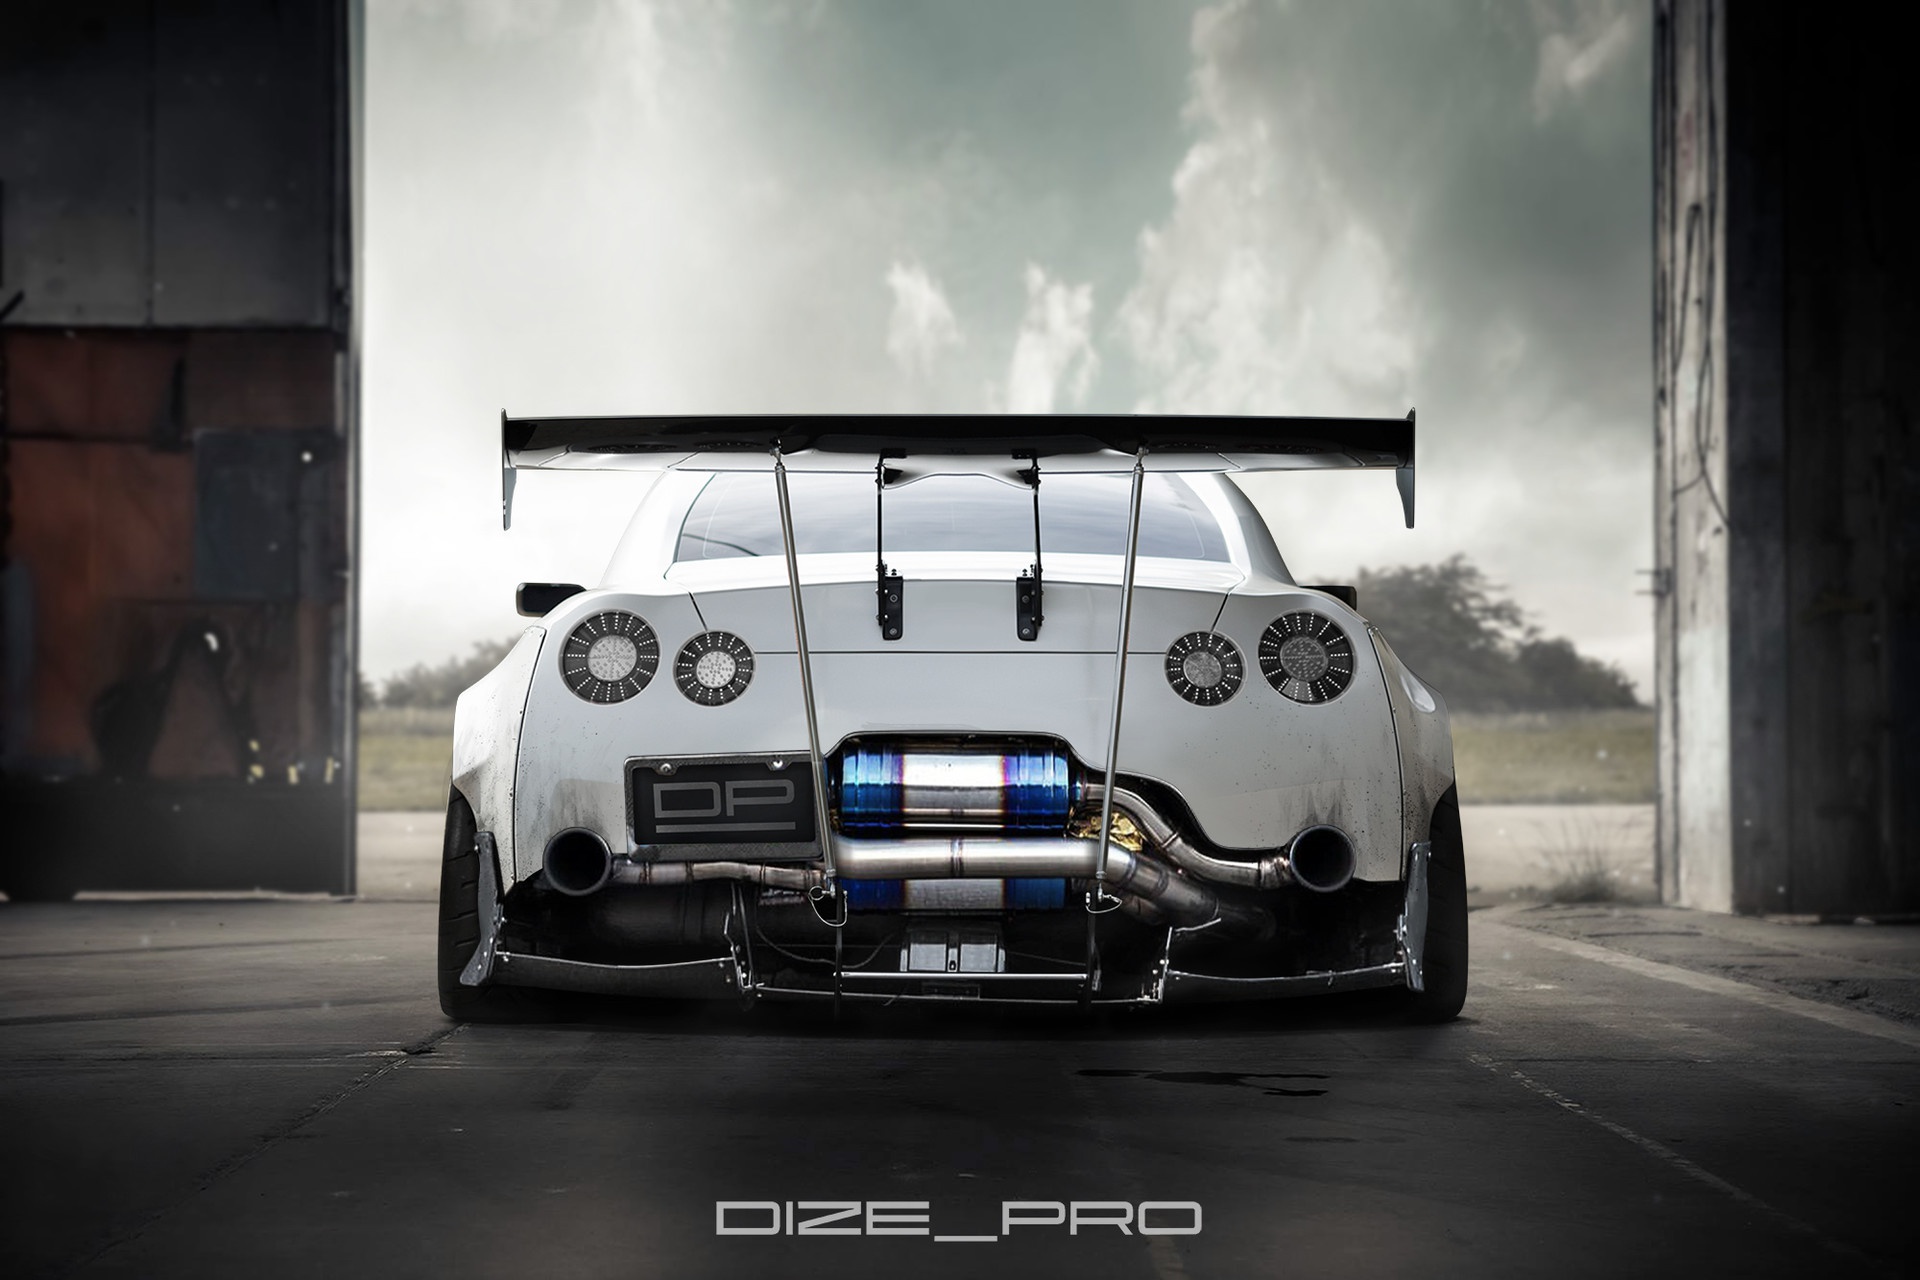 General 1920x1280 car vehicle Dmitry Shulgin Nissan GT-R Nissan bodykit Japanese cars rear view overcast clouds sky